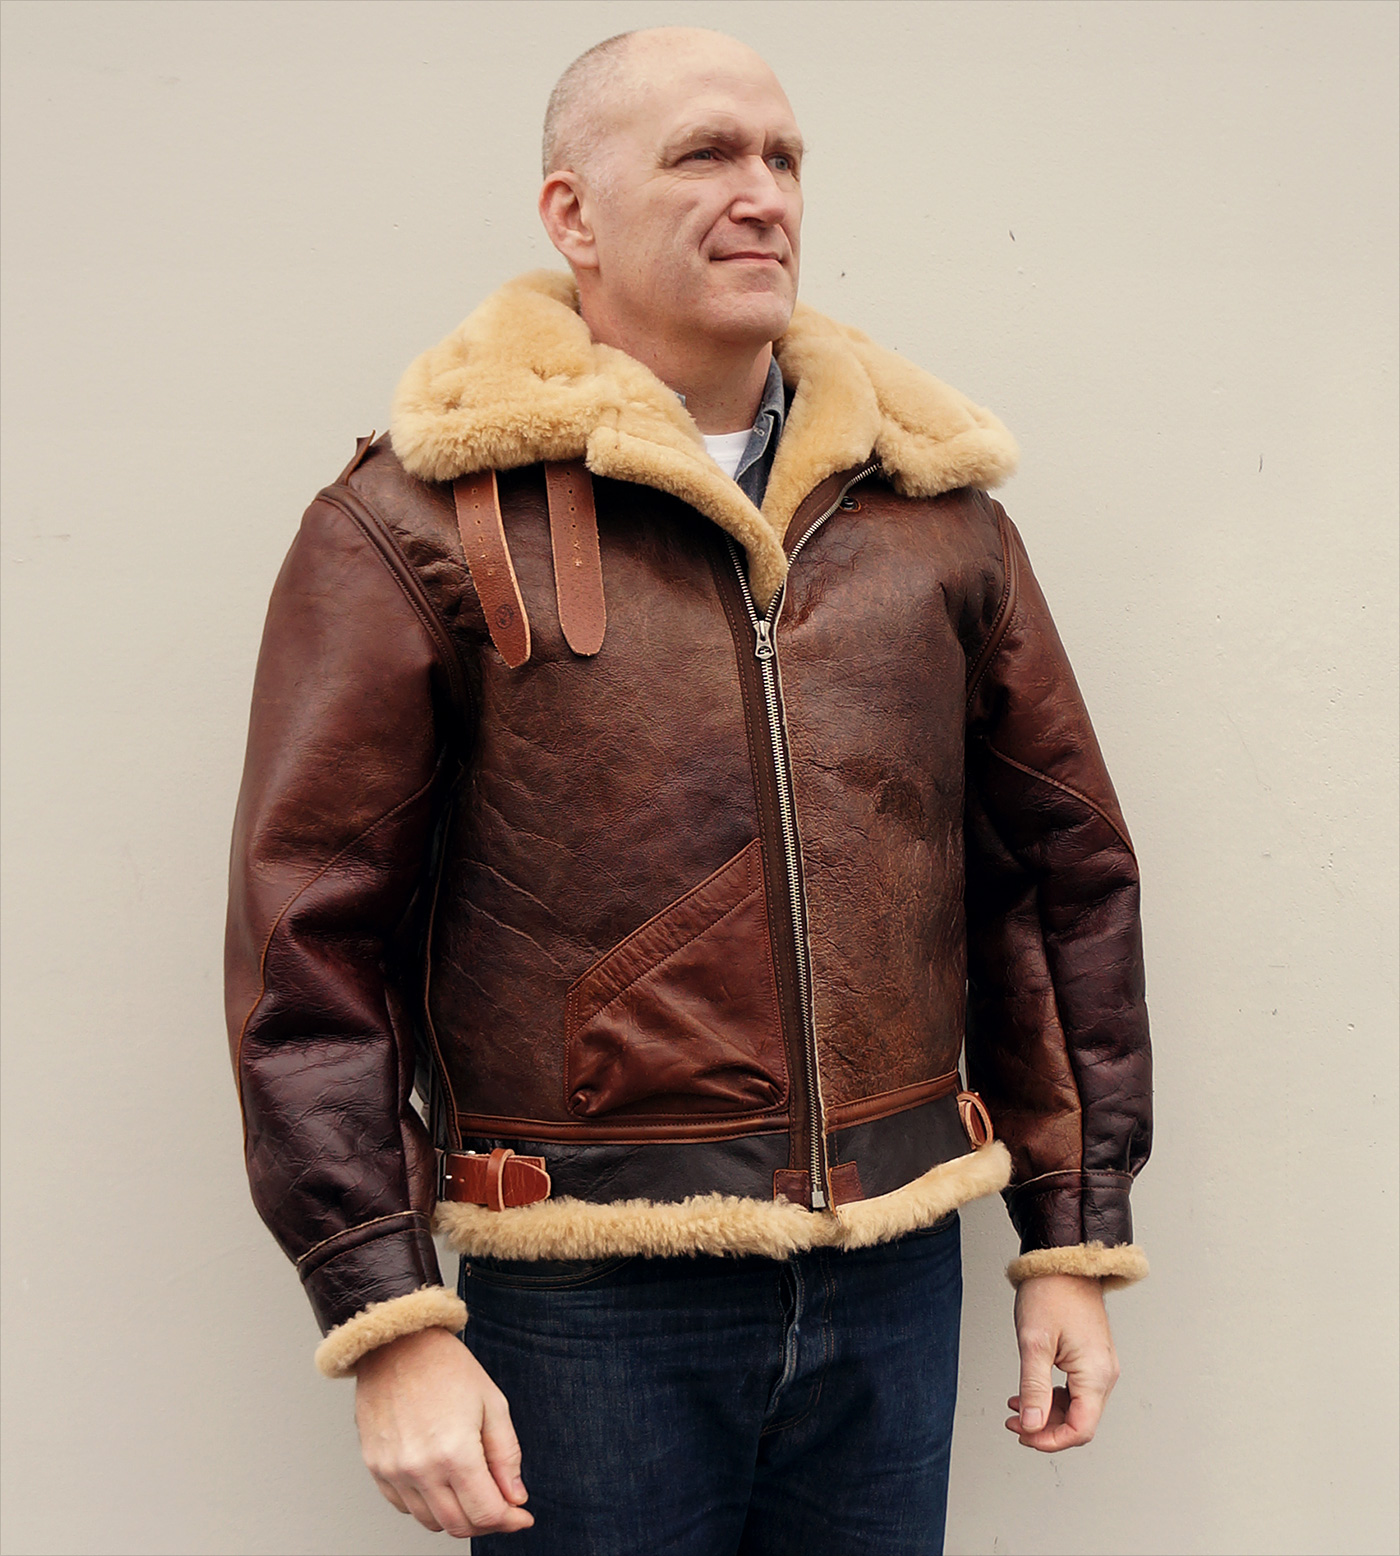 B-6 jacket made by John Chapman | Page 2 | Vintage Leather Jackets Forum